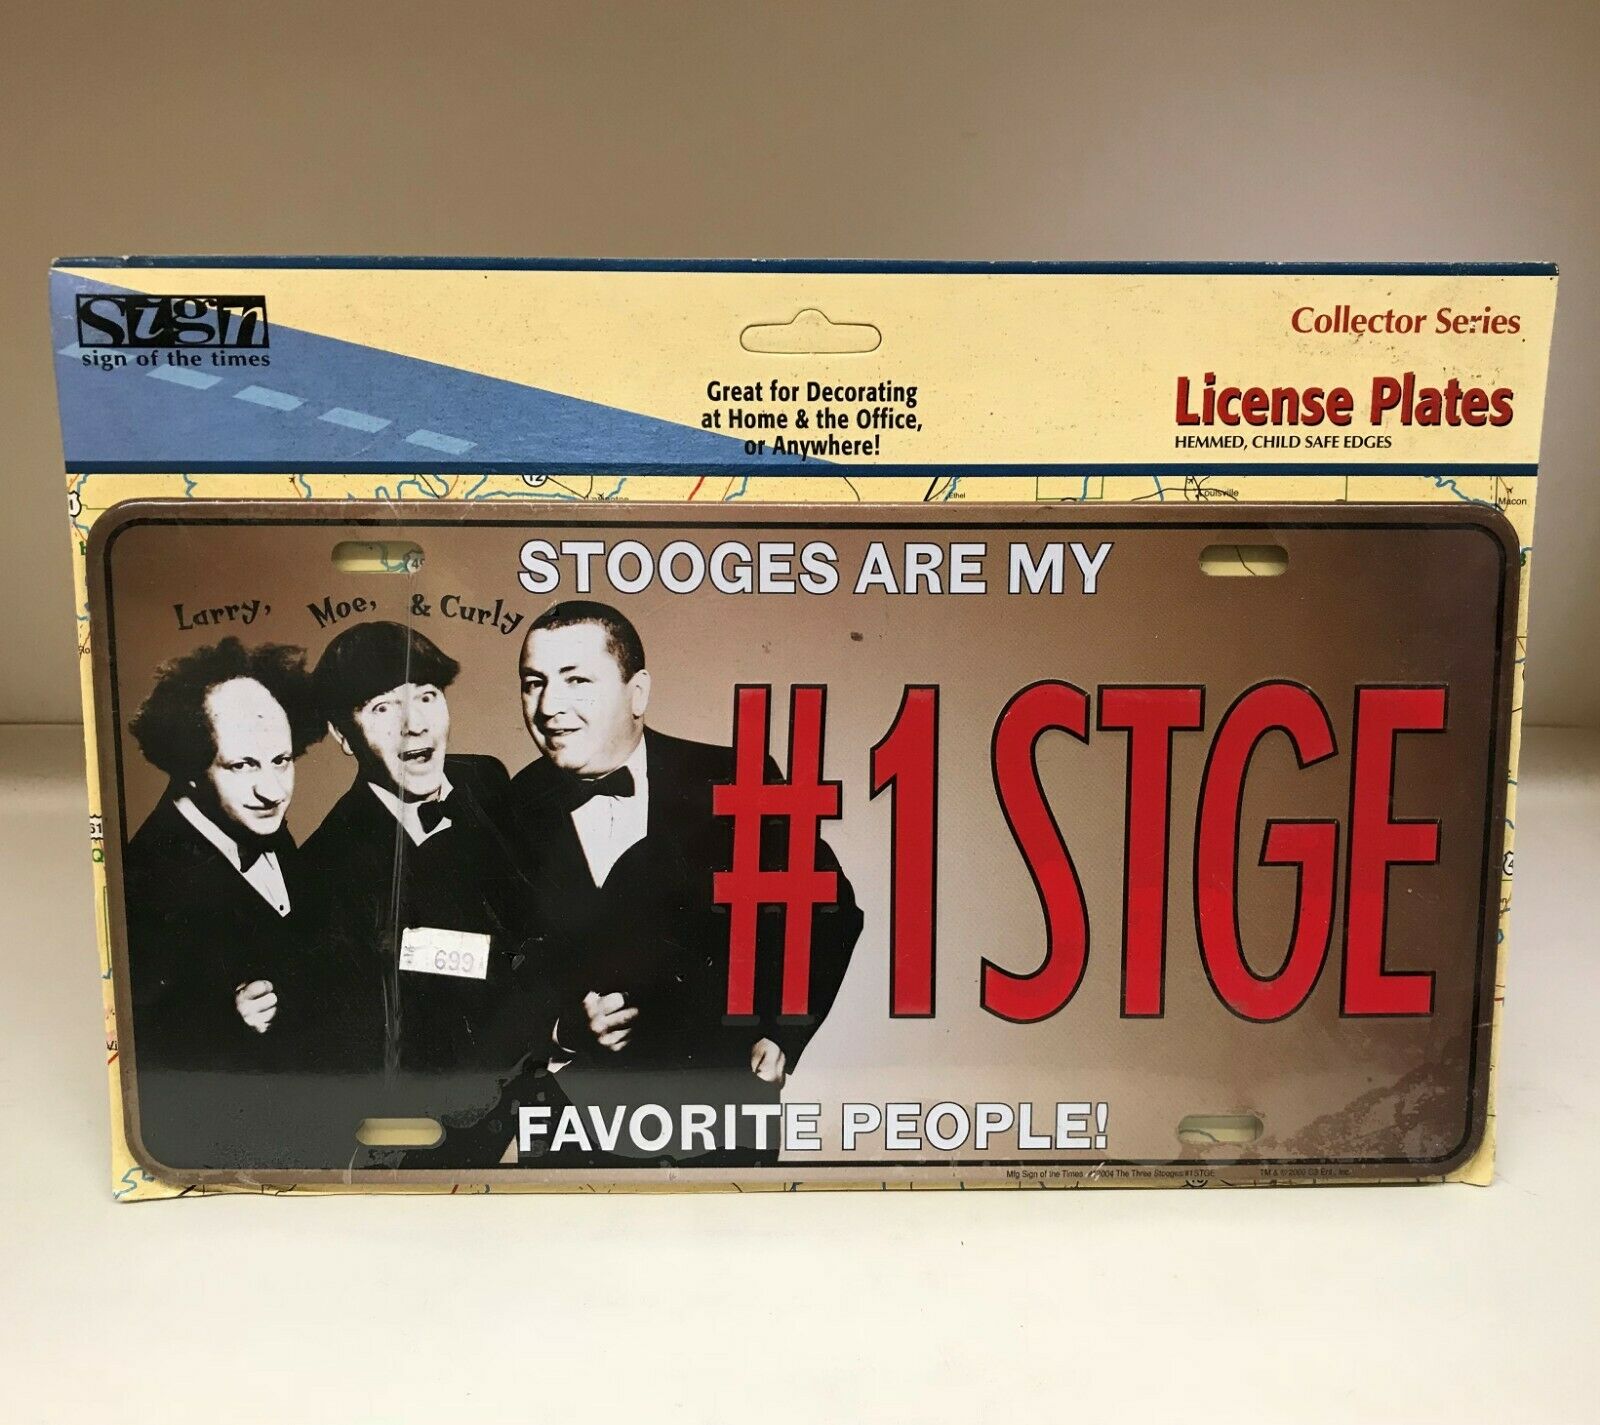 The Three Stooges Collectible License Plate - #1stge